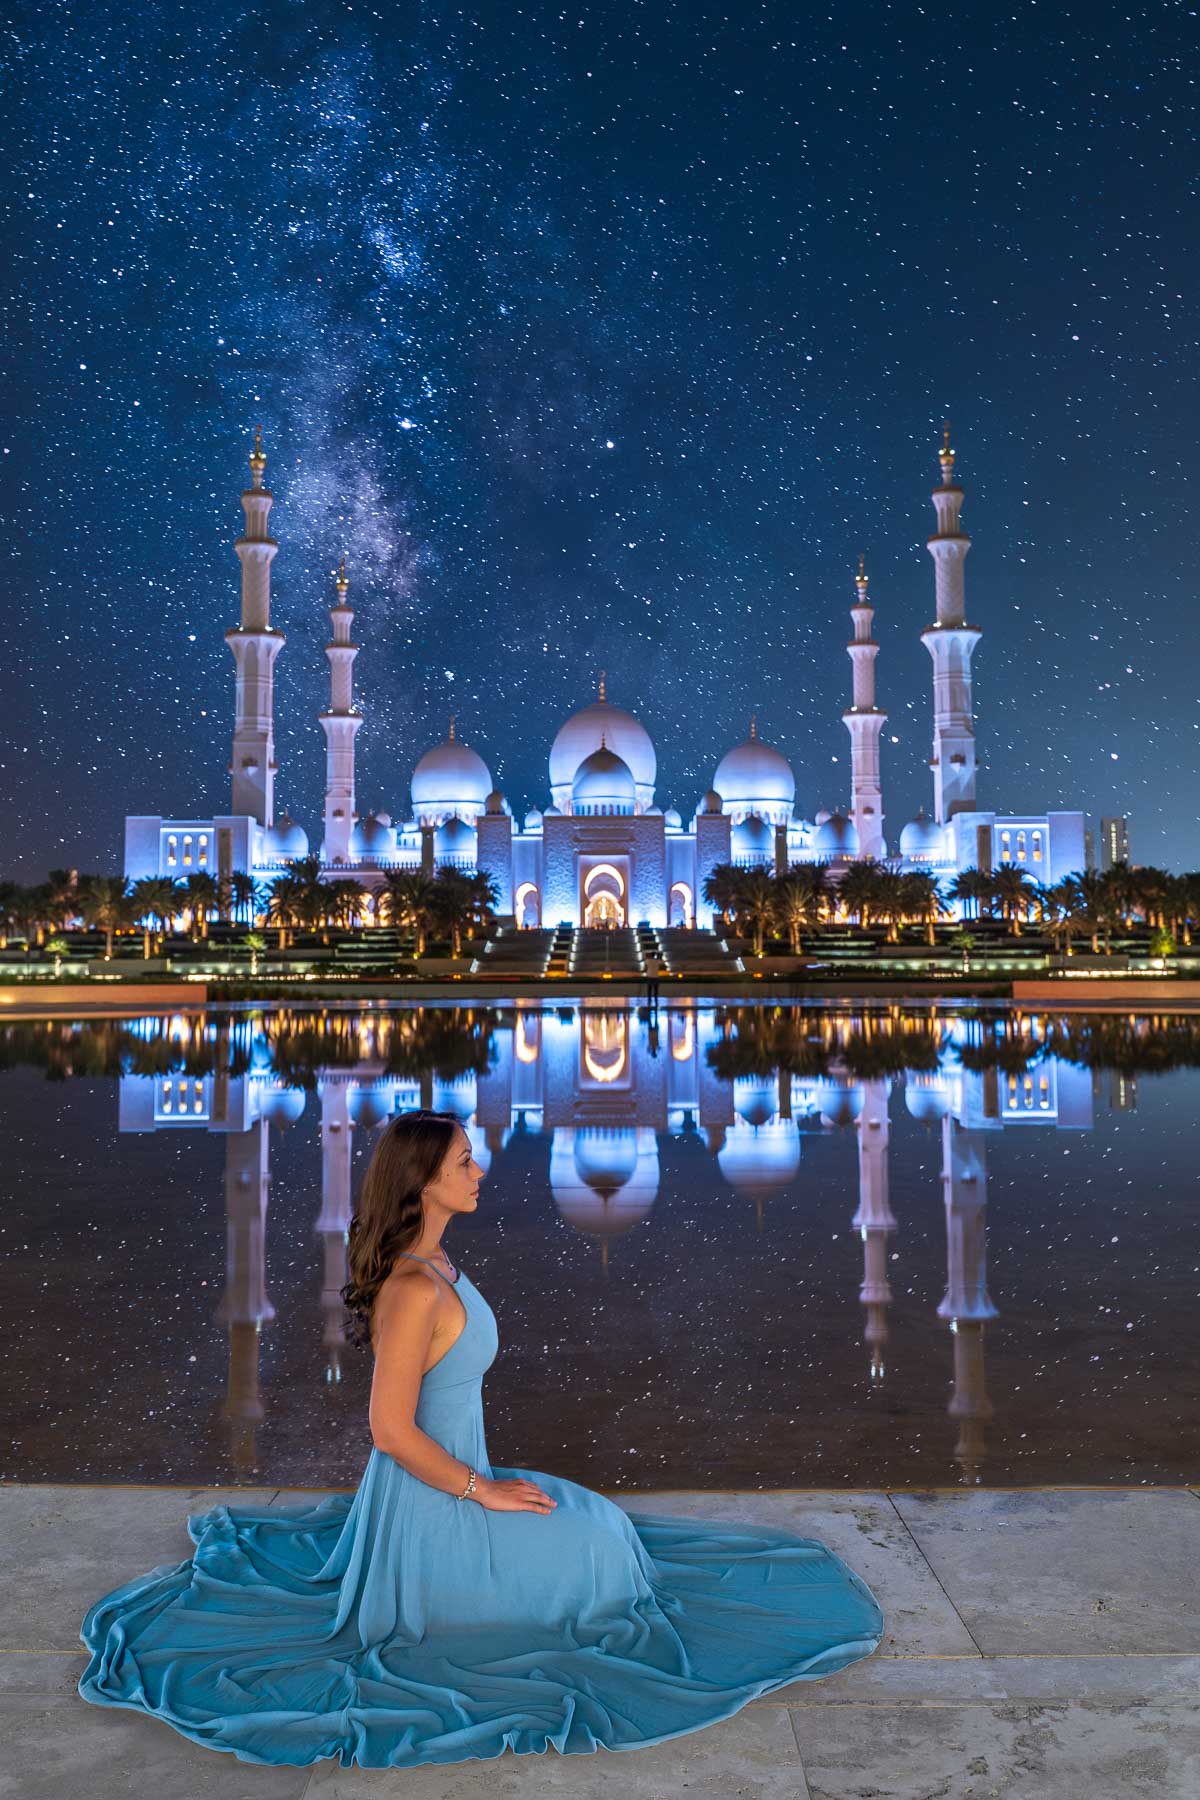 View of the Sheikh Zayed Grand Mosque at night with starry sky from Wahat al Karama, one of the most Instagrammable places in Abu Dhabi